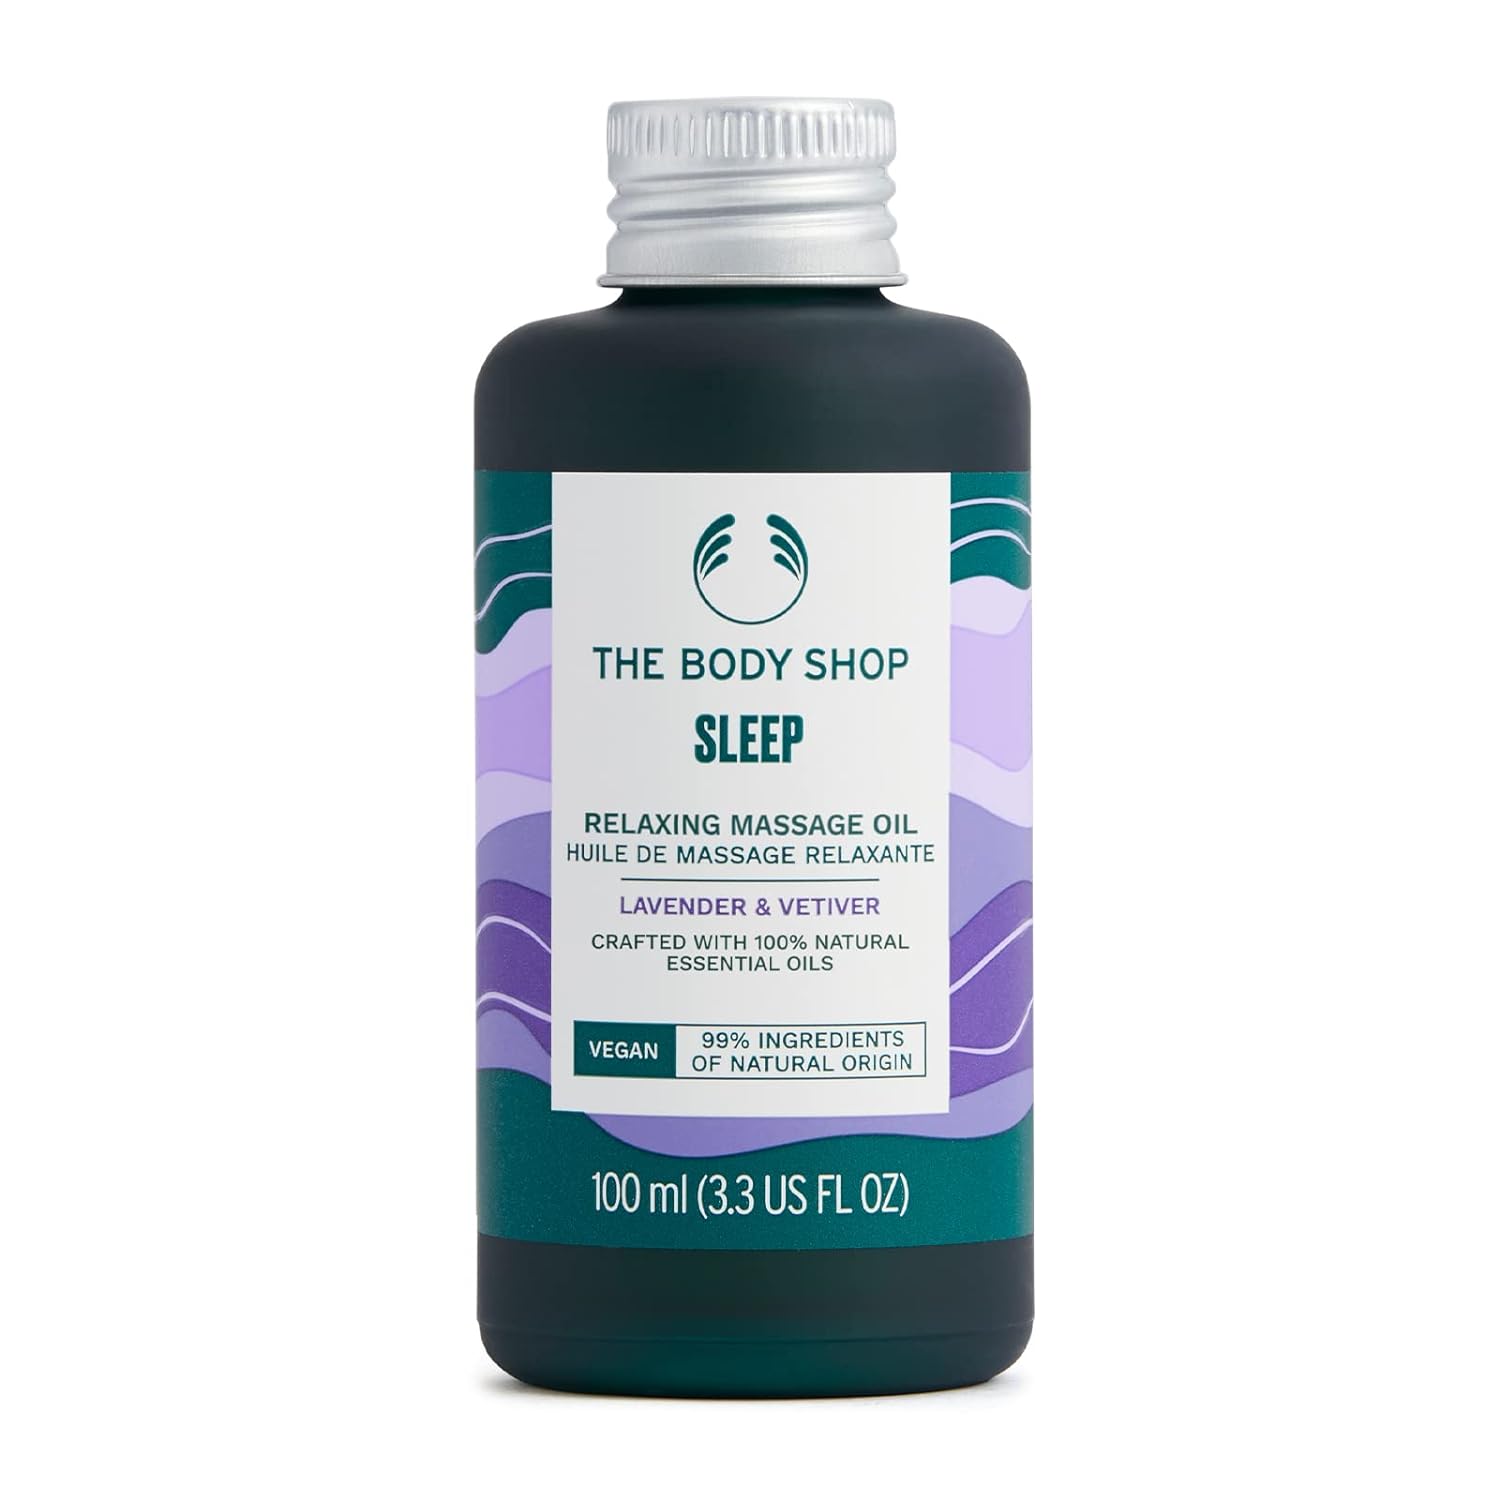 The Body Shop Sleep Relaxing Massage Oil with Lavender and Vetiver ? S